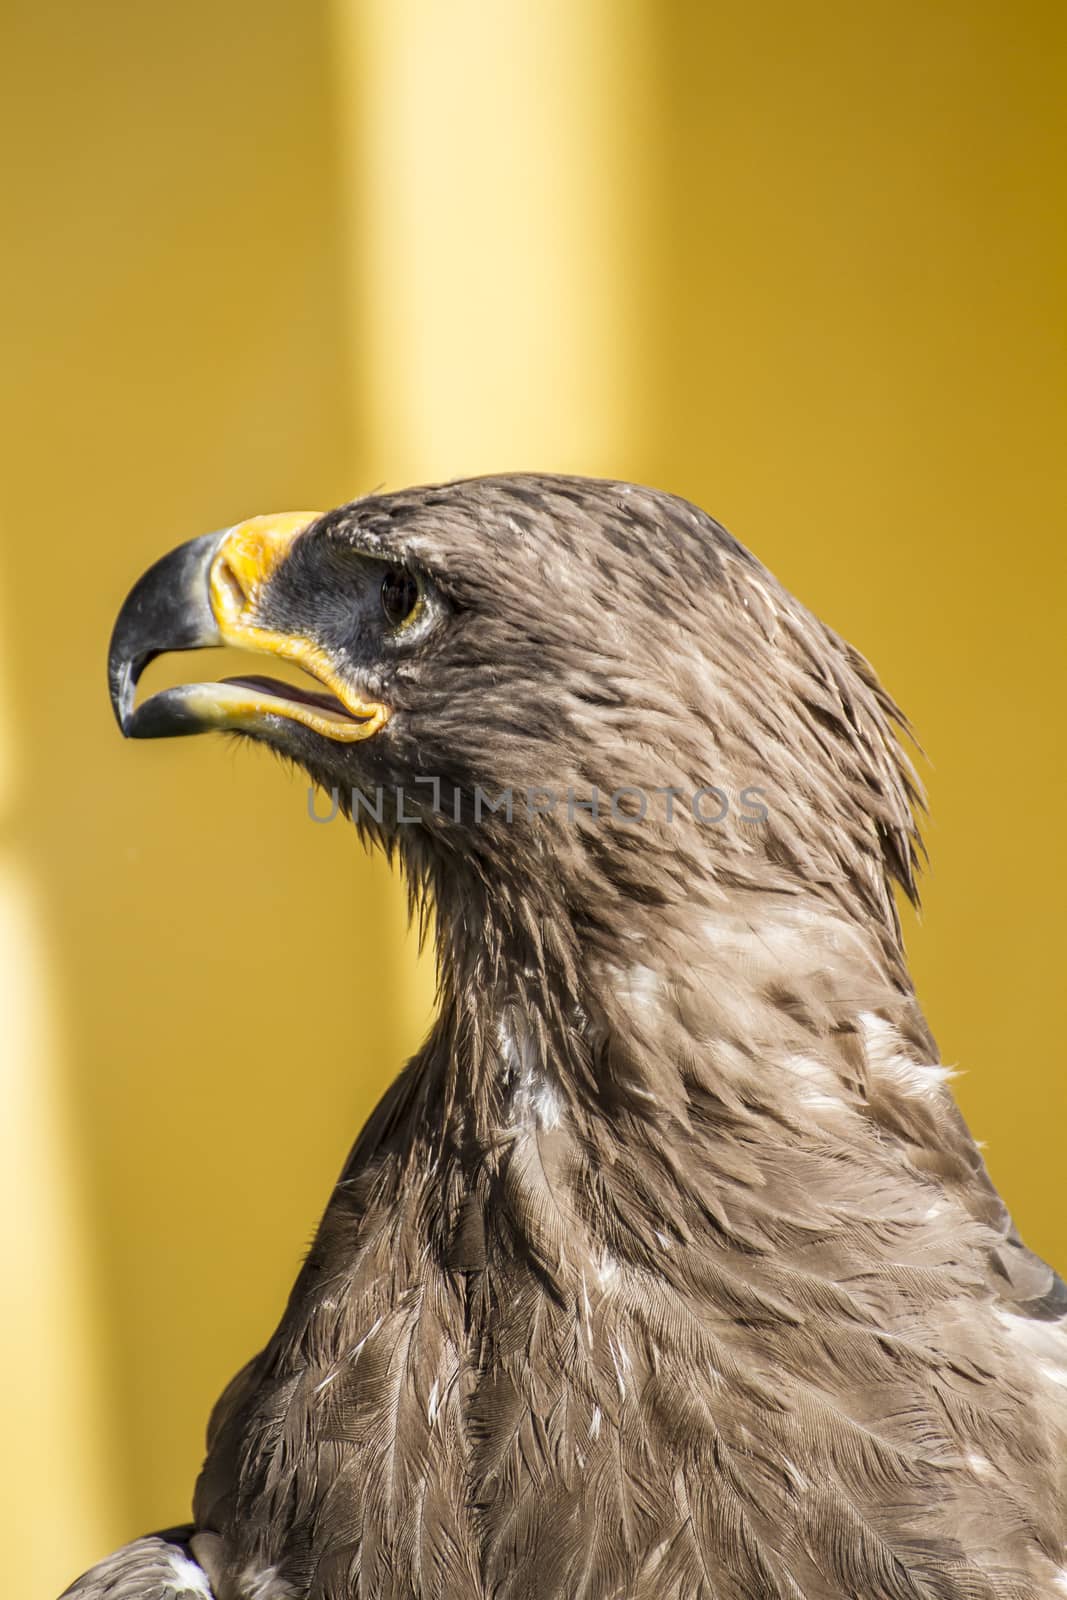 wild, golden eagle, detail of head with large eyes, pointed beak